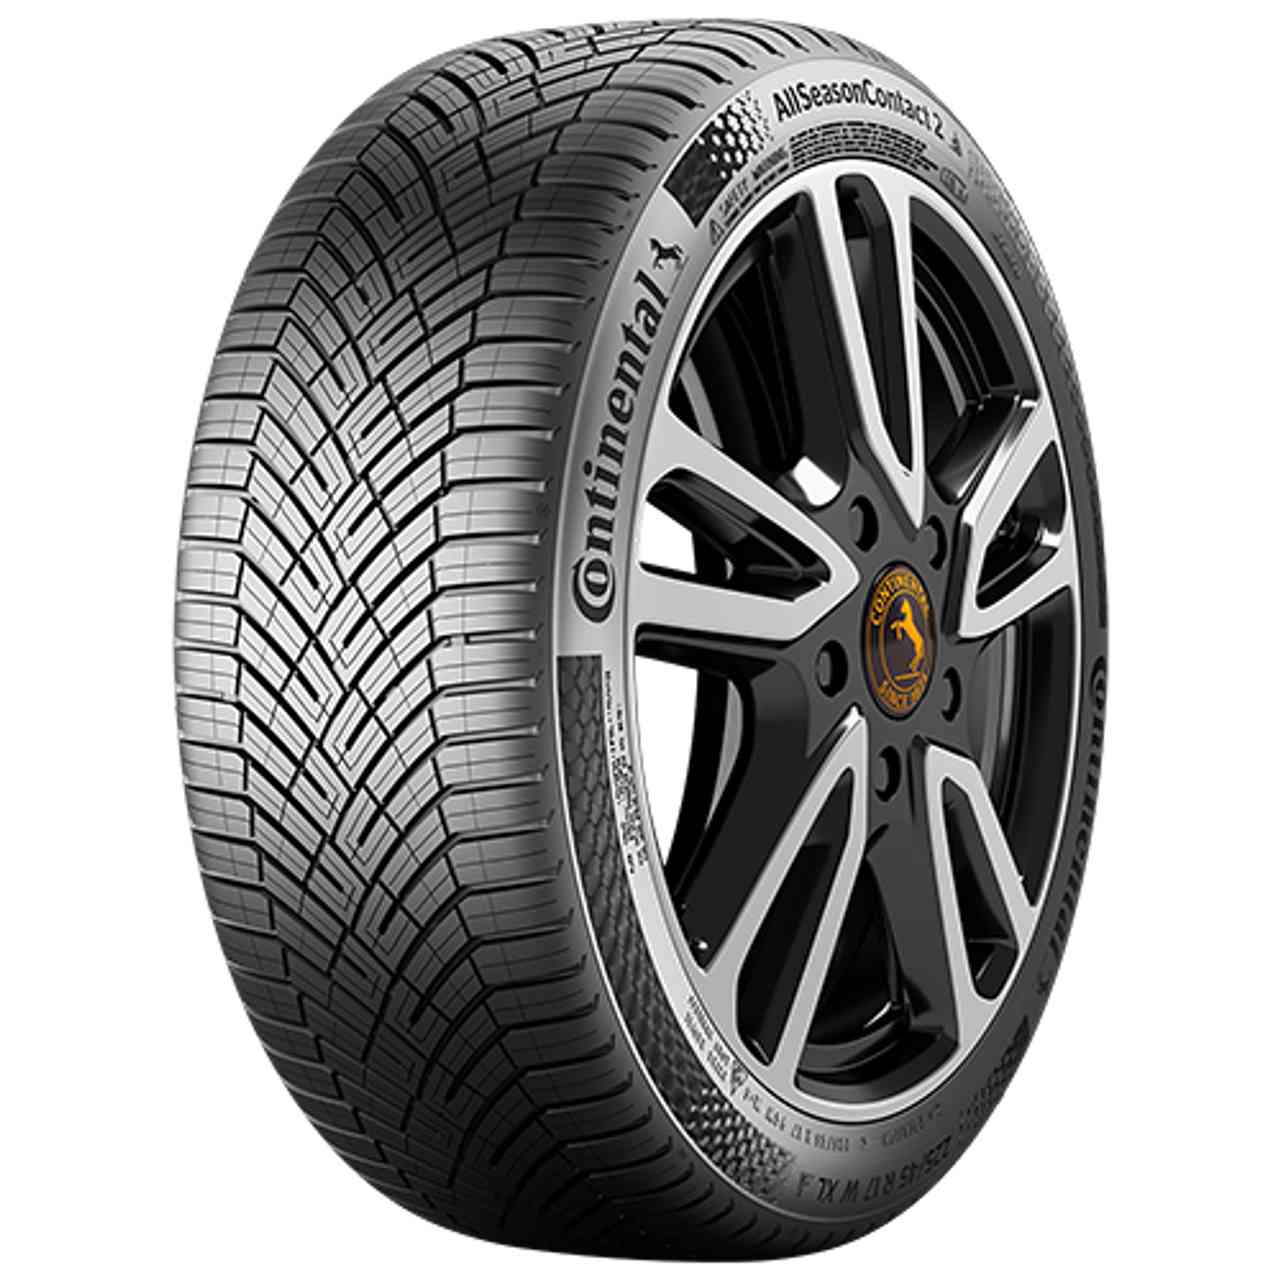 CONTINENTAL ALLSEASONCONTACT 2 (EVc) 195/65R15 95V BSW XL